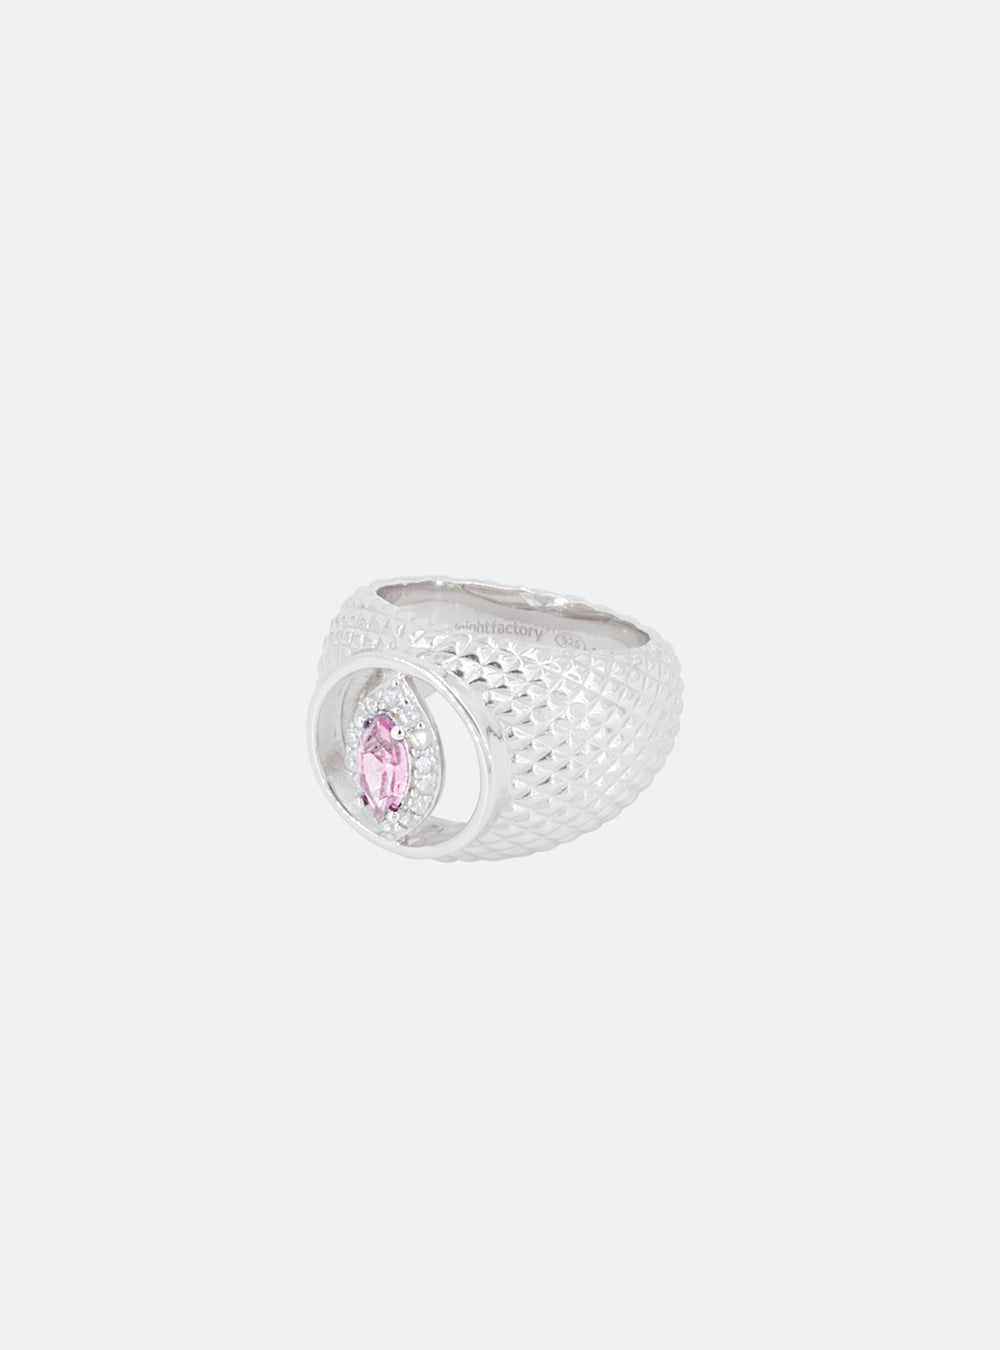 A MIDNIGHTFACTORY cat-eye cutout cocktail signet ring with a pink sapphire on a white background. [Pre-order]